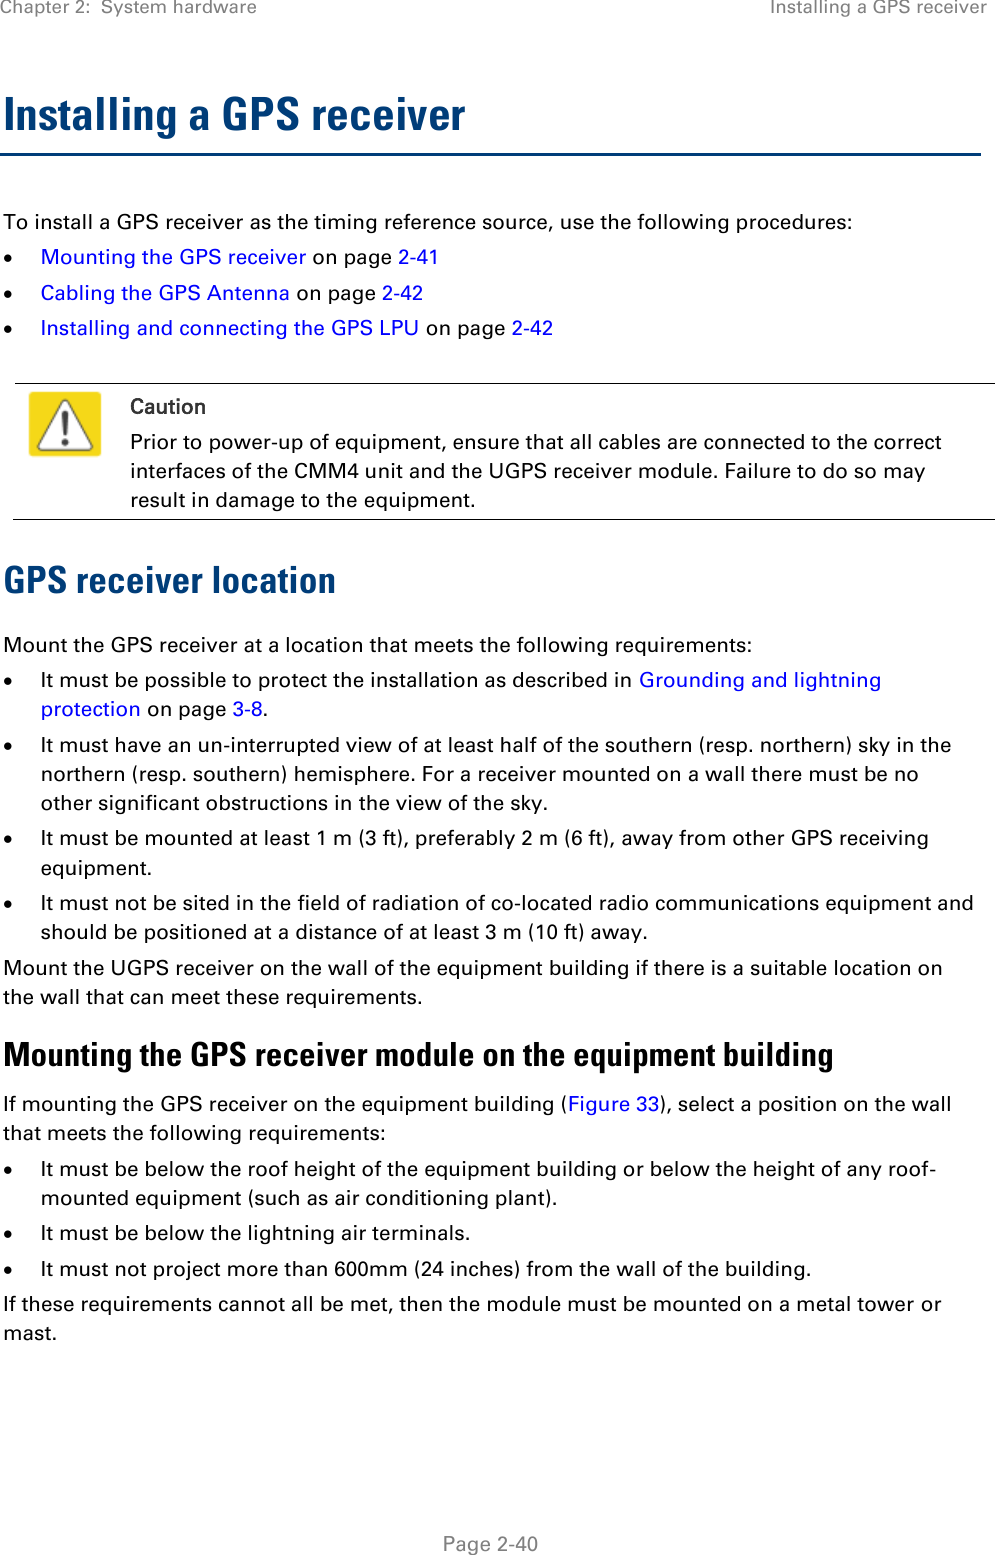 Chapter 2:  System hardware Installing a GPS receiver   Page 2-40 Installing a GPS receiver  To install a GPS receiver as the timing reference source, use the following procedures:  Mounting the GPS receiver on page 2-41  Cabling the GPS Antenna on page 2-42  Installing and connecting the GPS LPU on page 2-42   Caution Prior to power-up of equipment, ensure that all cables are connected to the correct interfaces of the CMM4 unit and the UGPS receiver module. Failure to do so may result in damage to the equipment. GPS receiver location Mount the GPS receiver at a location that meets the following requirements:  It must be possible to protect the installation as described in Grounding and lightning protection on page 3-8.  It must have an un-interrupted view of at least half of the southern (resp. northern) sky in the northern (resp. southern) hemisphere. For a receiver mounted on a wall there must be no other significant obstructions in the view of the sky.  It must be mounted at least 1 m (3 ft), preferably 2 m (6 ft), away from other GPS receiving equipment.  It must not be sited in the field of radiation of co-located radio communications equipment and should be positioned at a distance of at least 3 m (10 ft) away. Mount the UGPS receiver on the wall of the equipment building if there is a suitable location on the wall that can meet these requirements.  Mounting the GPS receiver module on the equipment building If mounting the GPS receiver on the equipment building (Figure 33), select a position on the wall that meets the following requirements:  It must be below the roof height of the equipment building or below the height of any roof-mounted equipment (such as air conditioning plant).  It must be below the lightning air terminals.  It must not project more than 600mm (24 inches) from the wall of the building. If these requirements cannot all be met, then the module must be mounted on a metal tower or mast. 